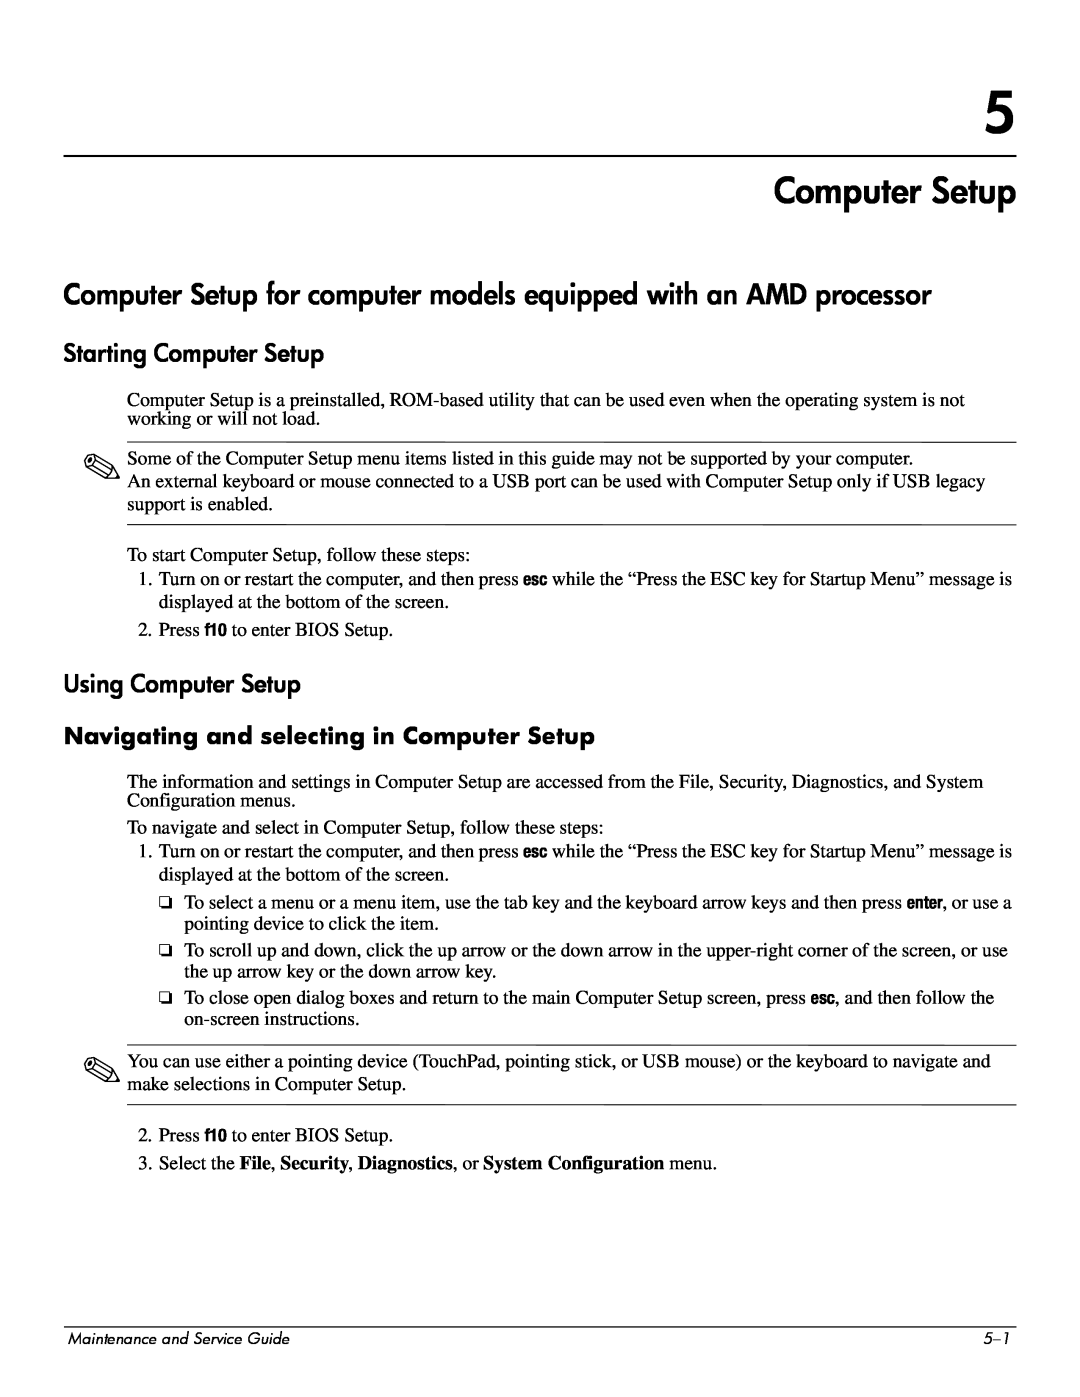 Compaq 510, 511, 515 manual Computer Setup for computer models equipped with an AMD processor, Starting Computer Setup 